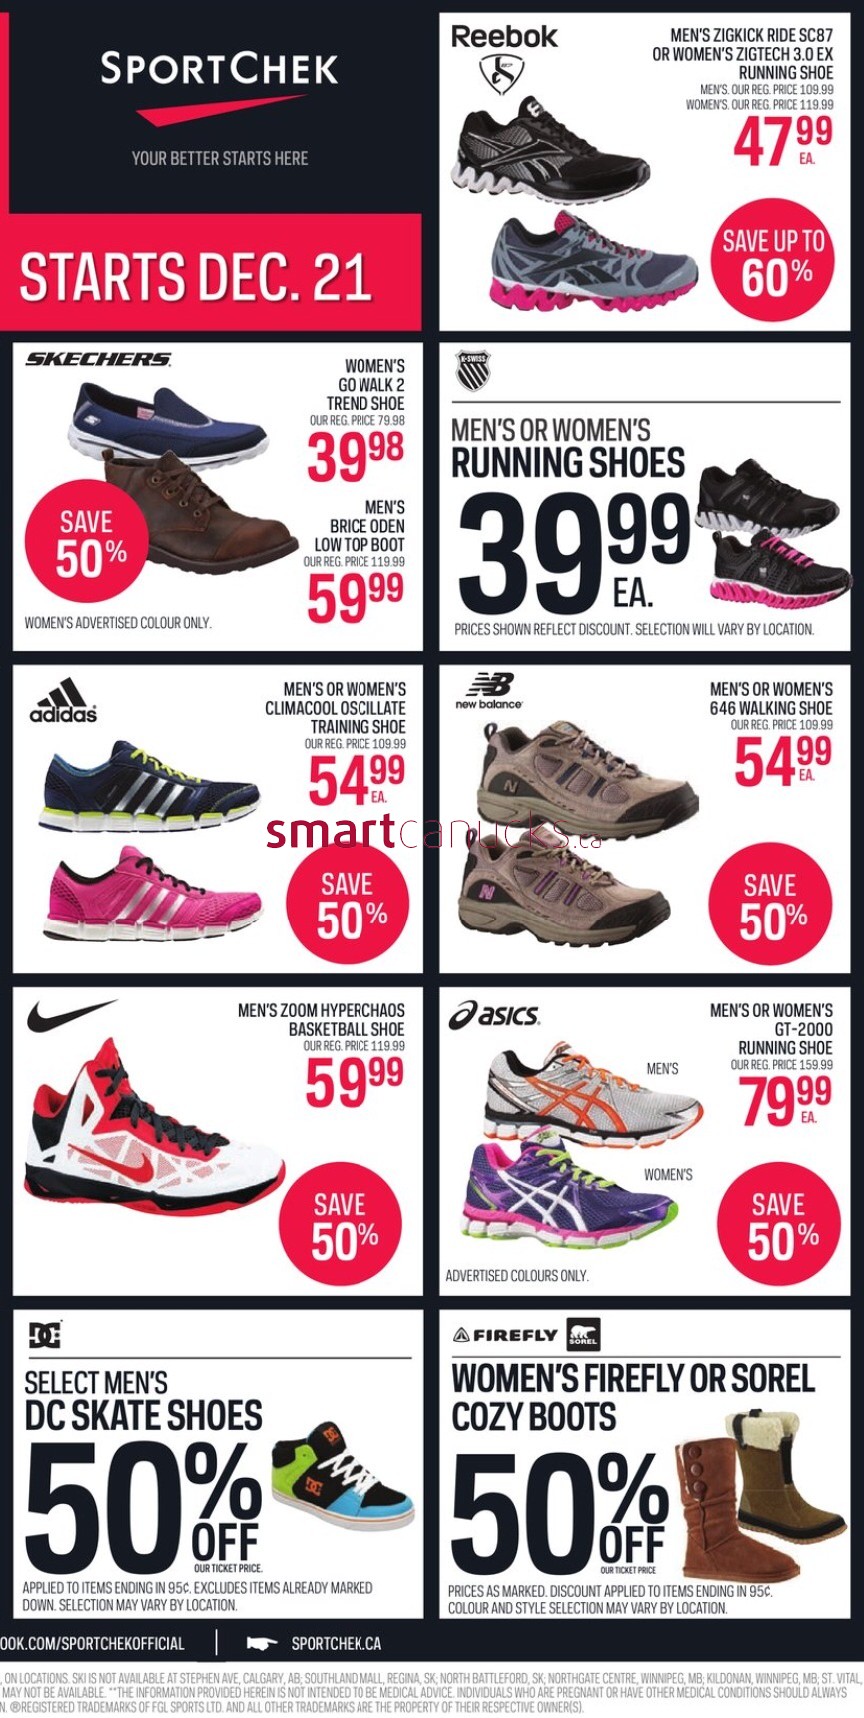 sport chek shoes clearance